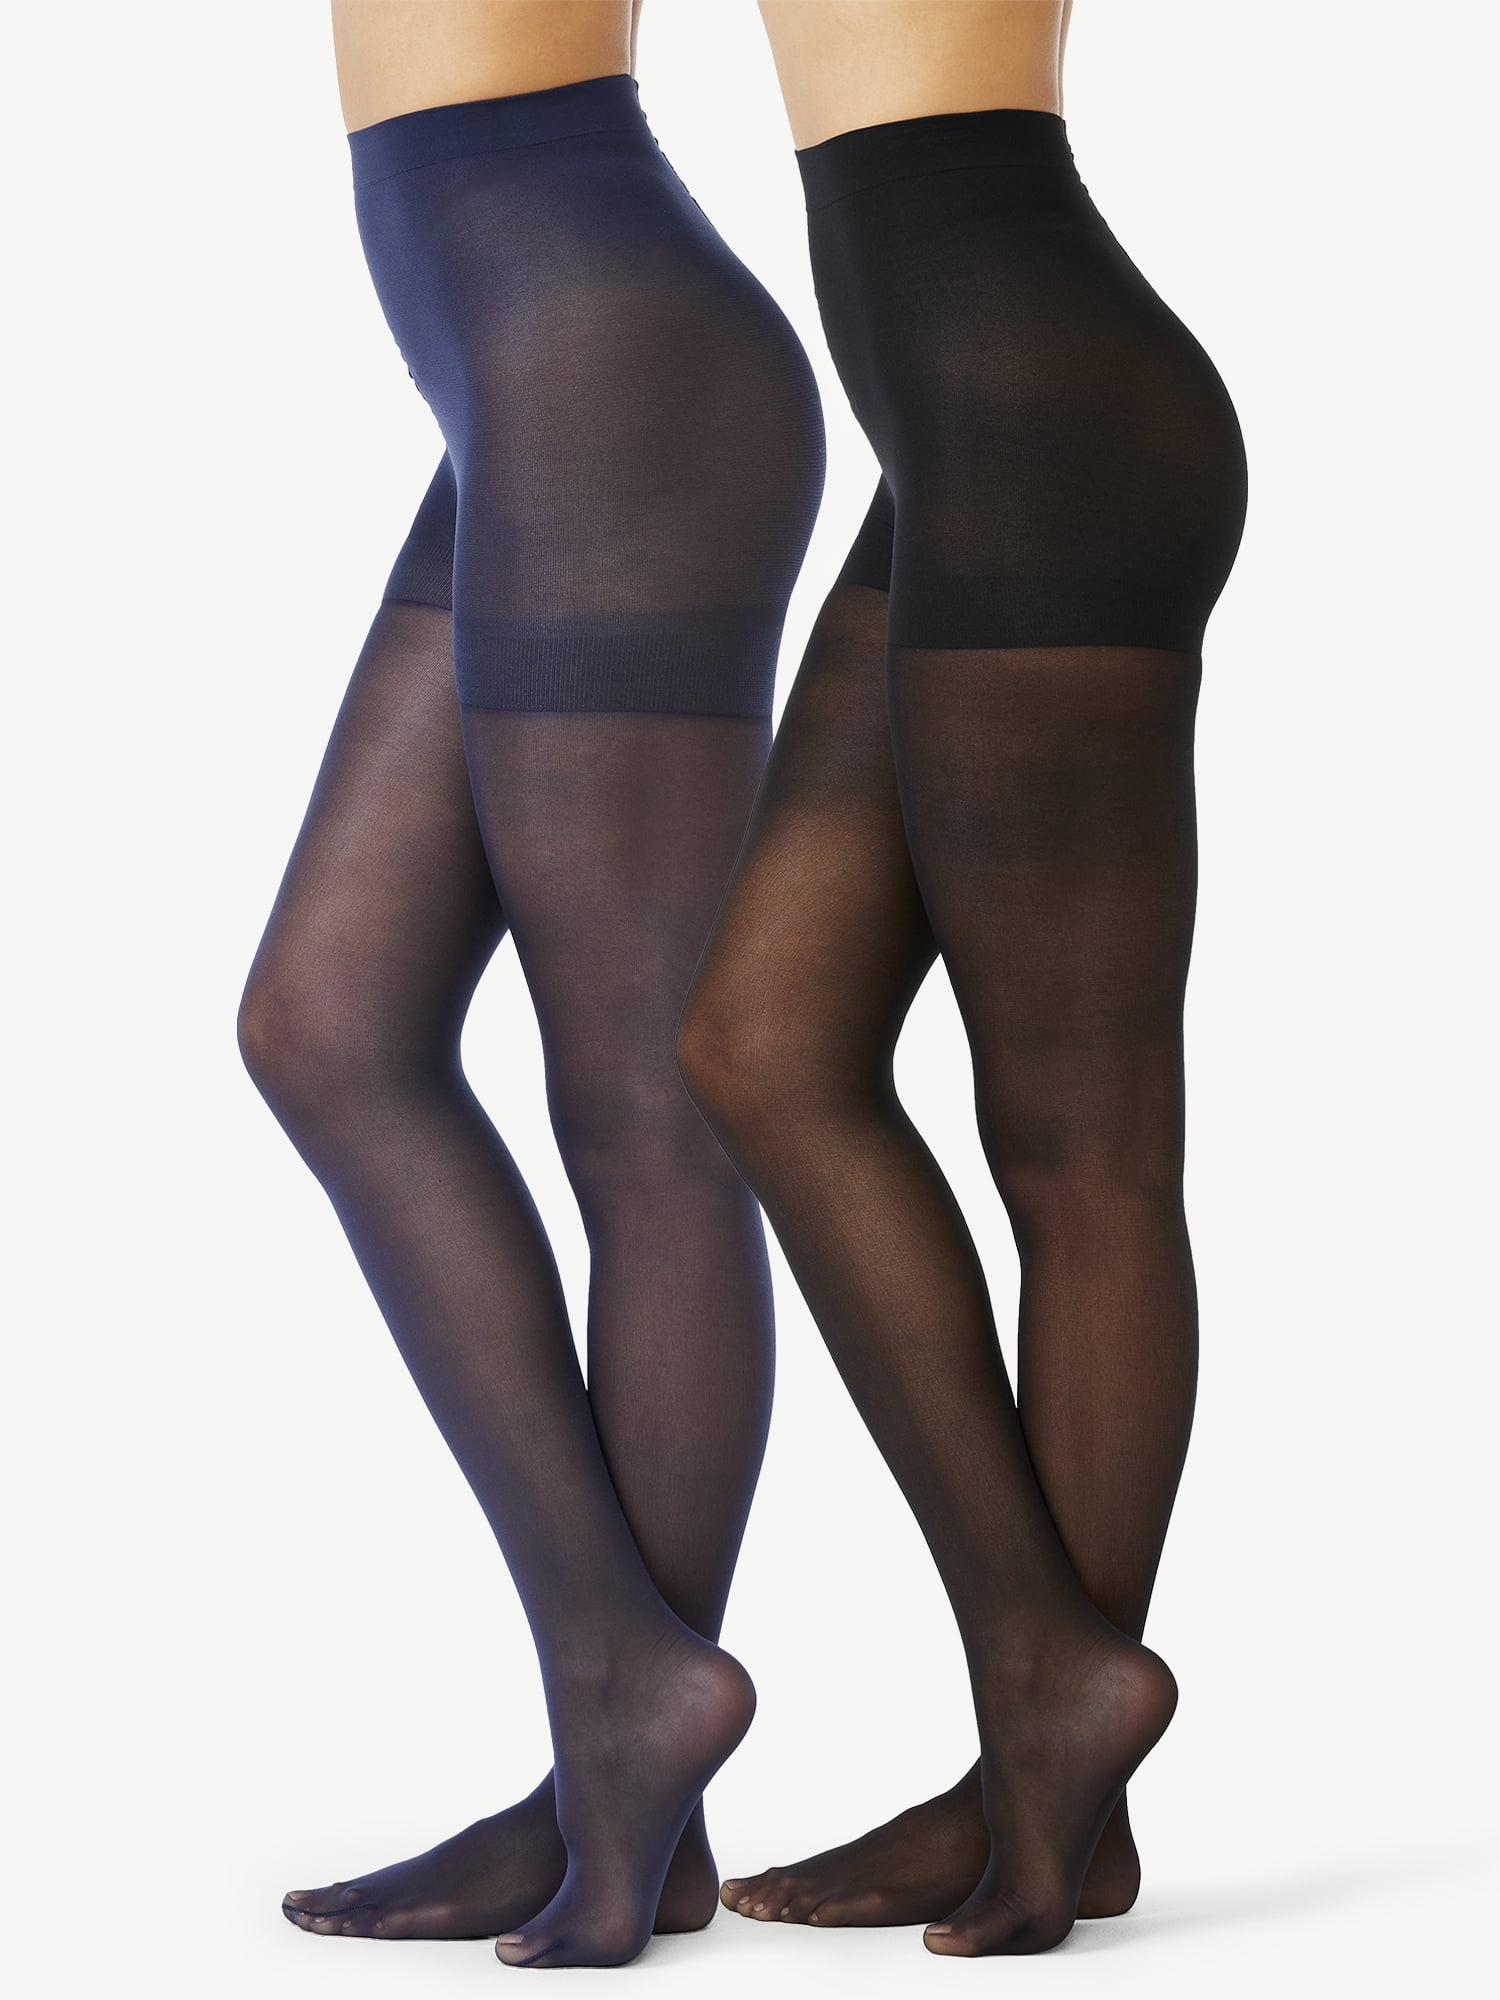 Pack of 2 pairs of opaque Maternity tights - brown